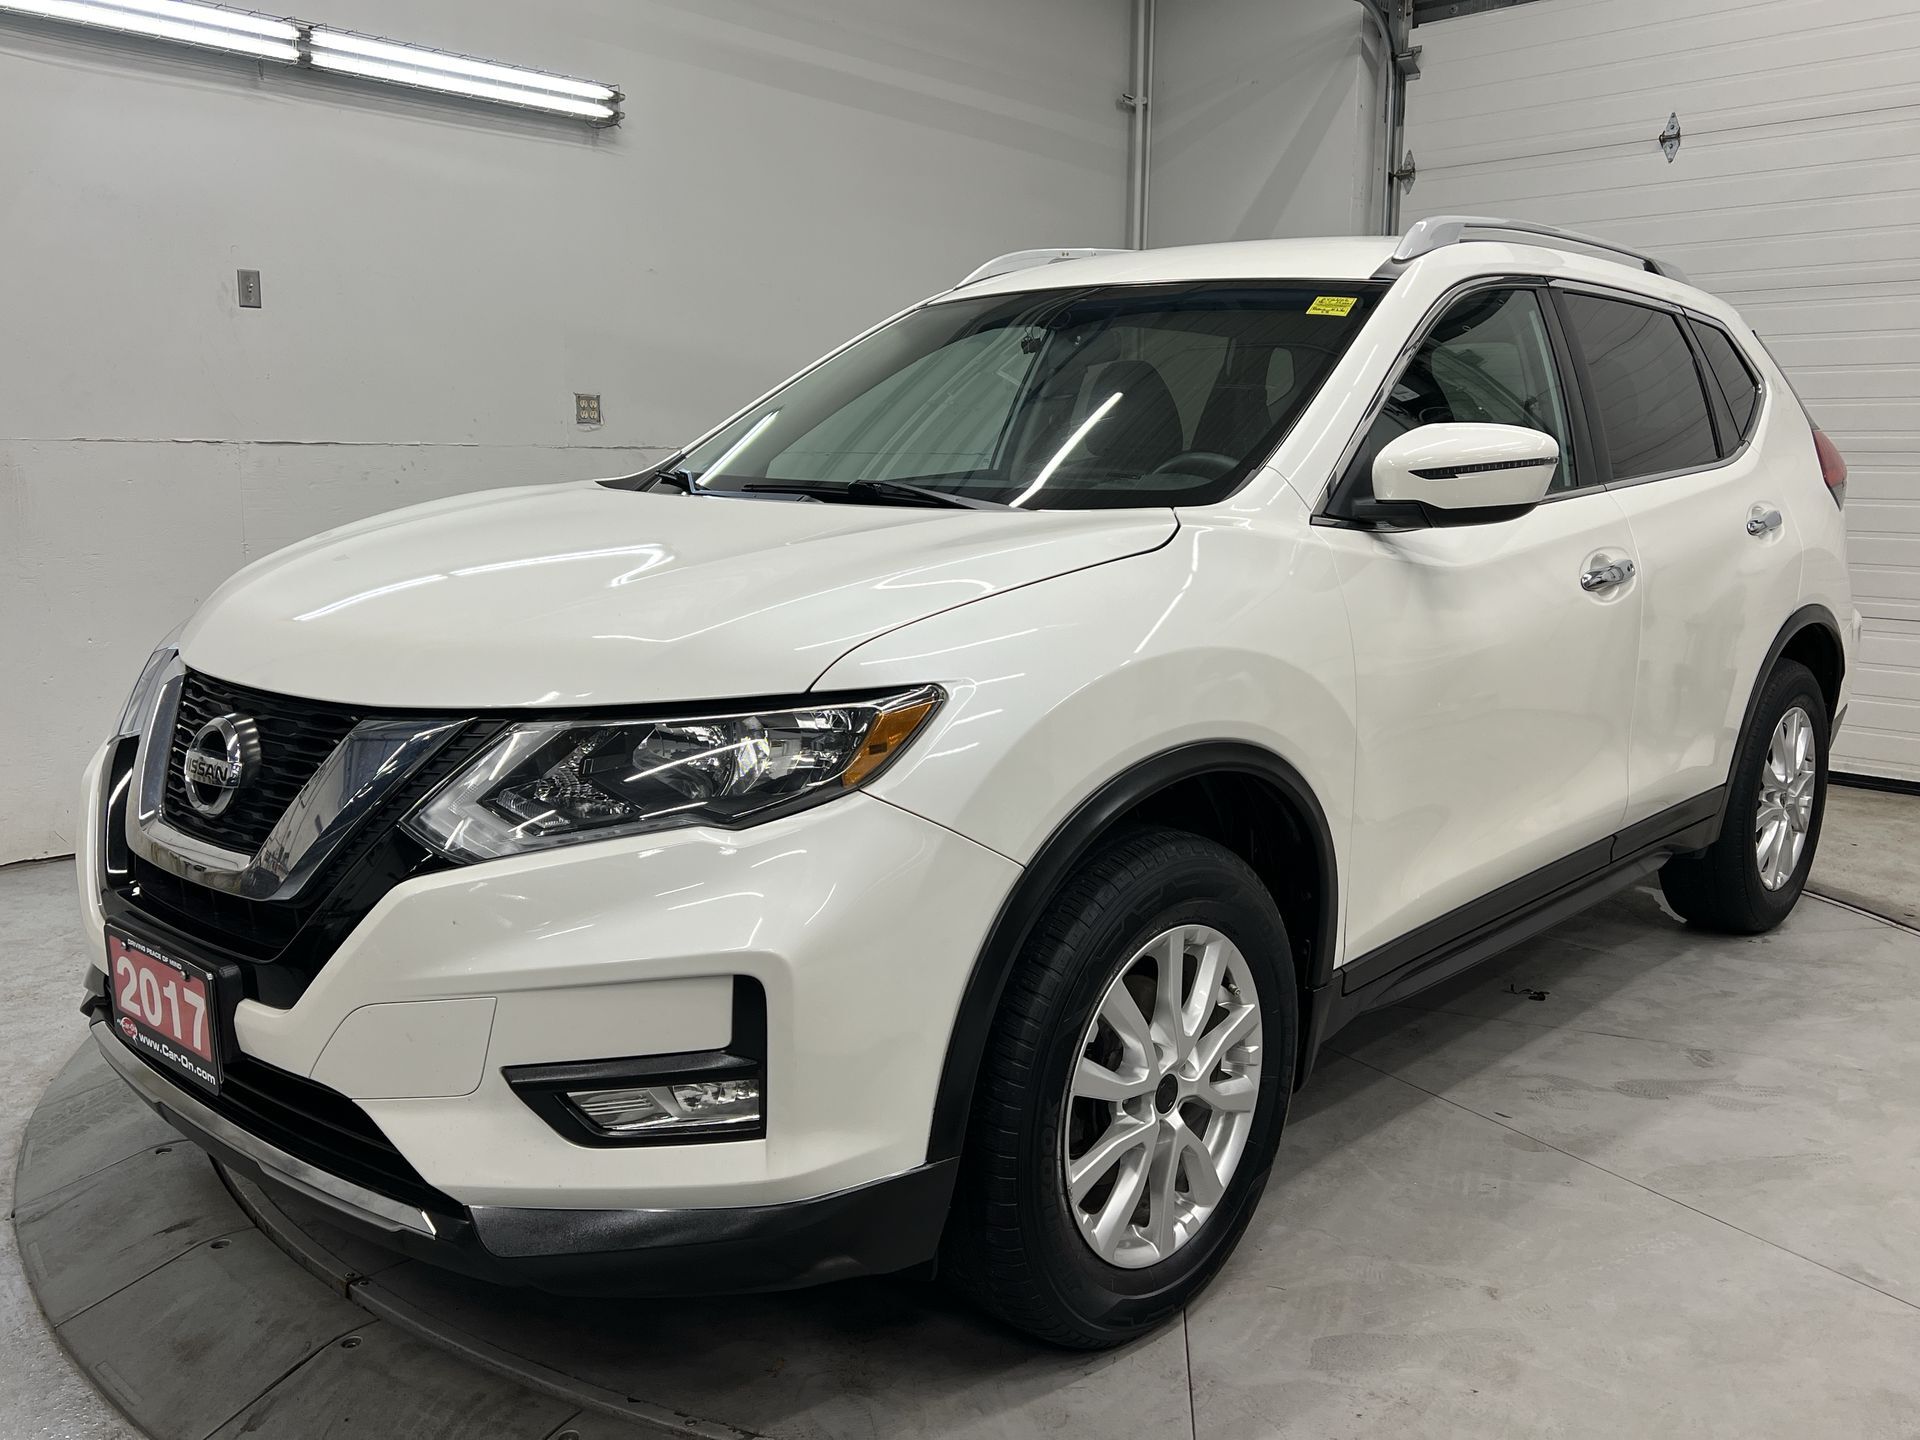 2017 Nissan Rogue SV AWD| REAR CAM | REMOTE START | ONLY 58,000 KMS!